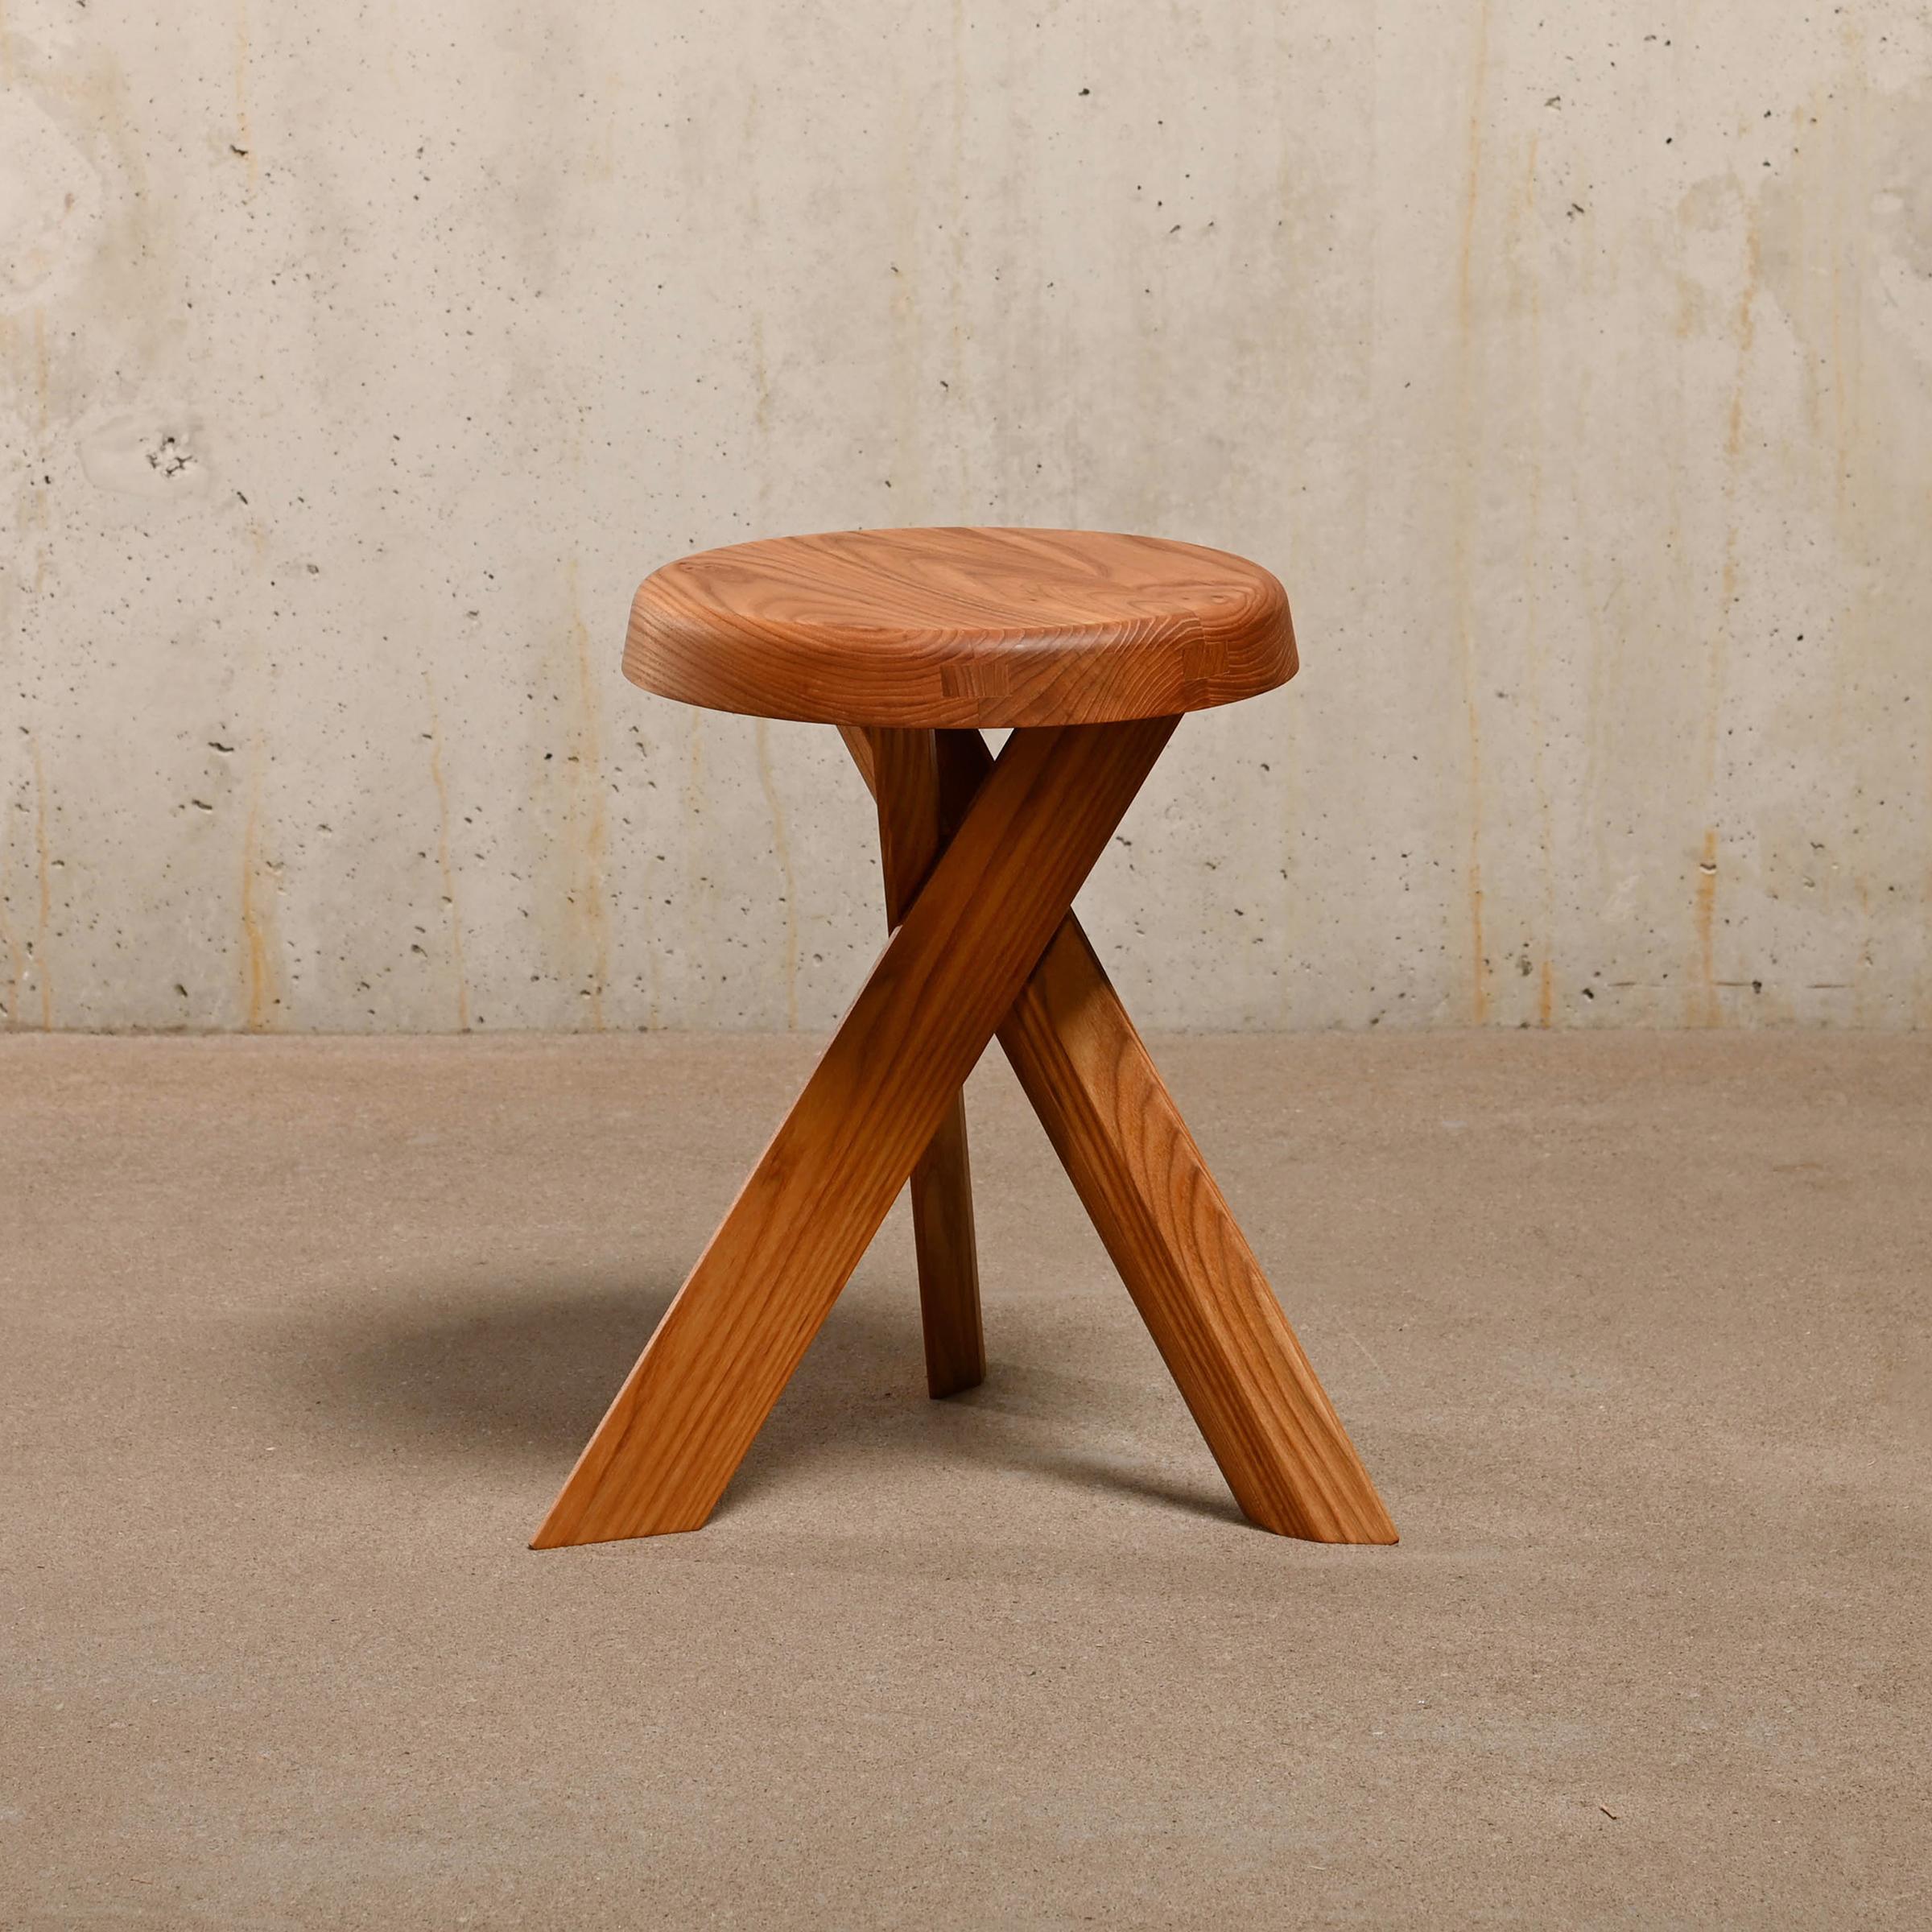 Mid-20th Century Pierre Chapo Stool S31A in solid Elmwood by Chapo Creation, France